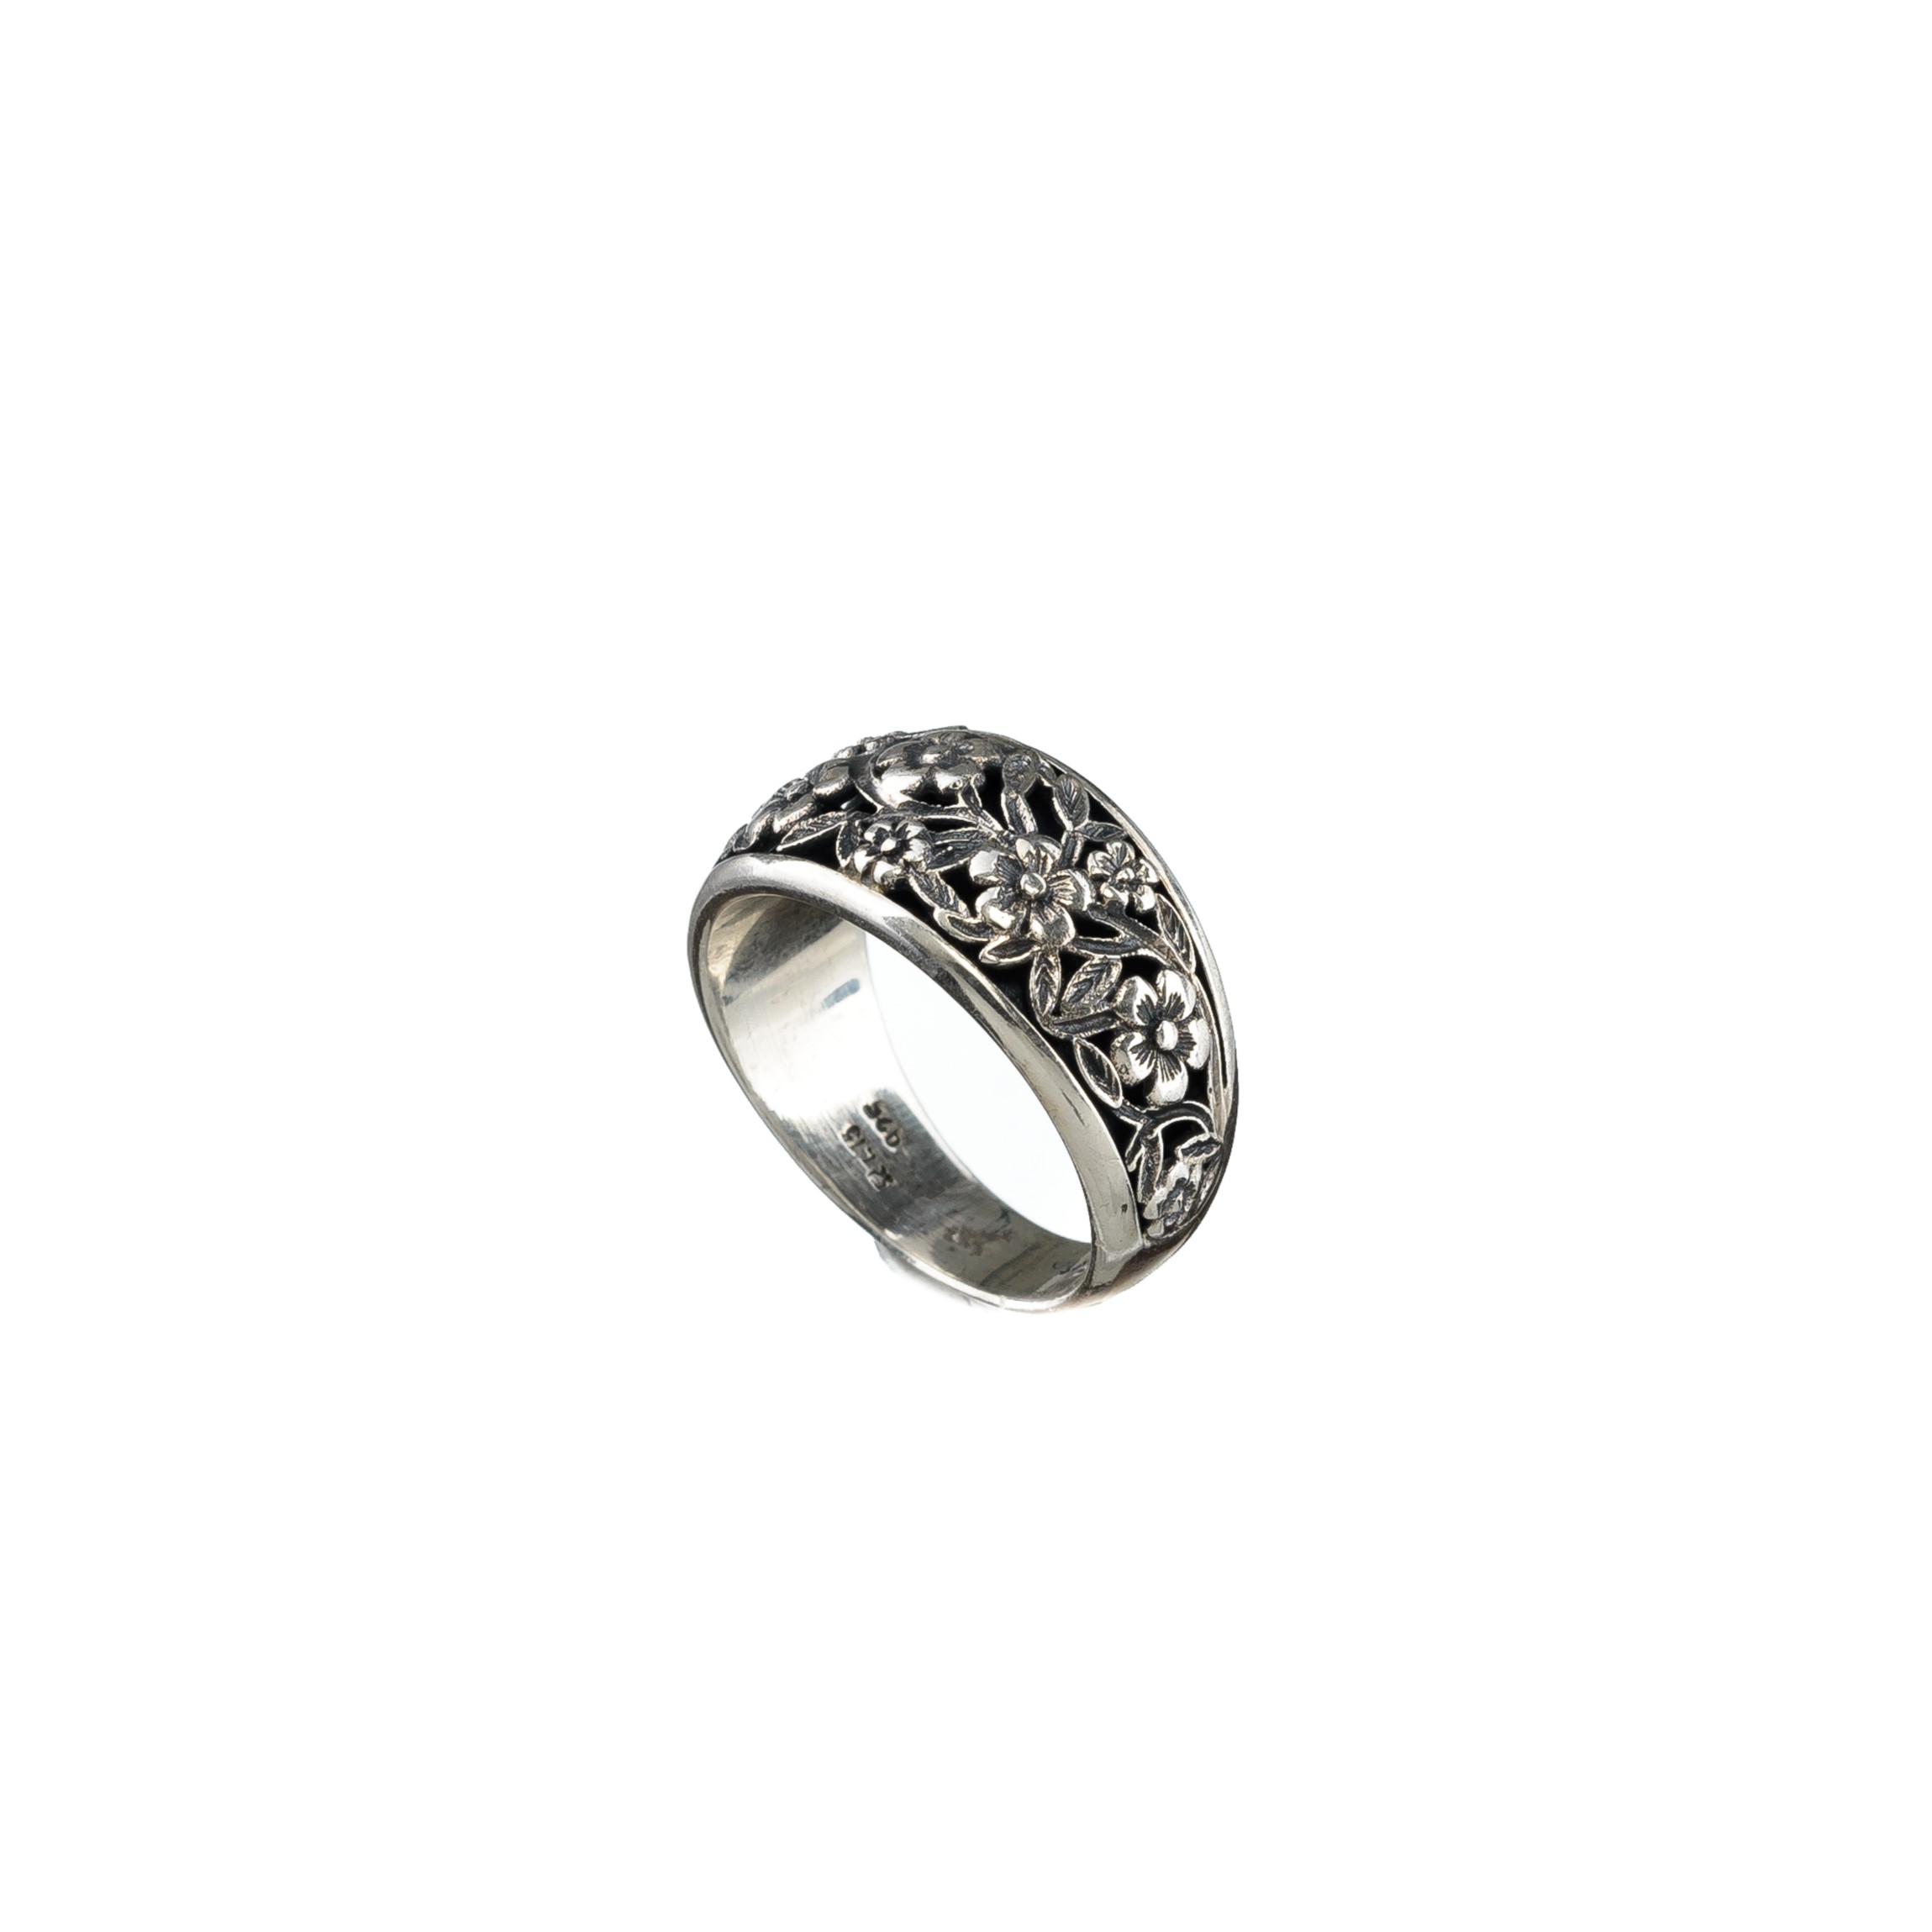 Harmony ring in Sterling Silver